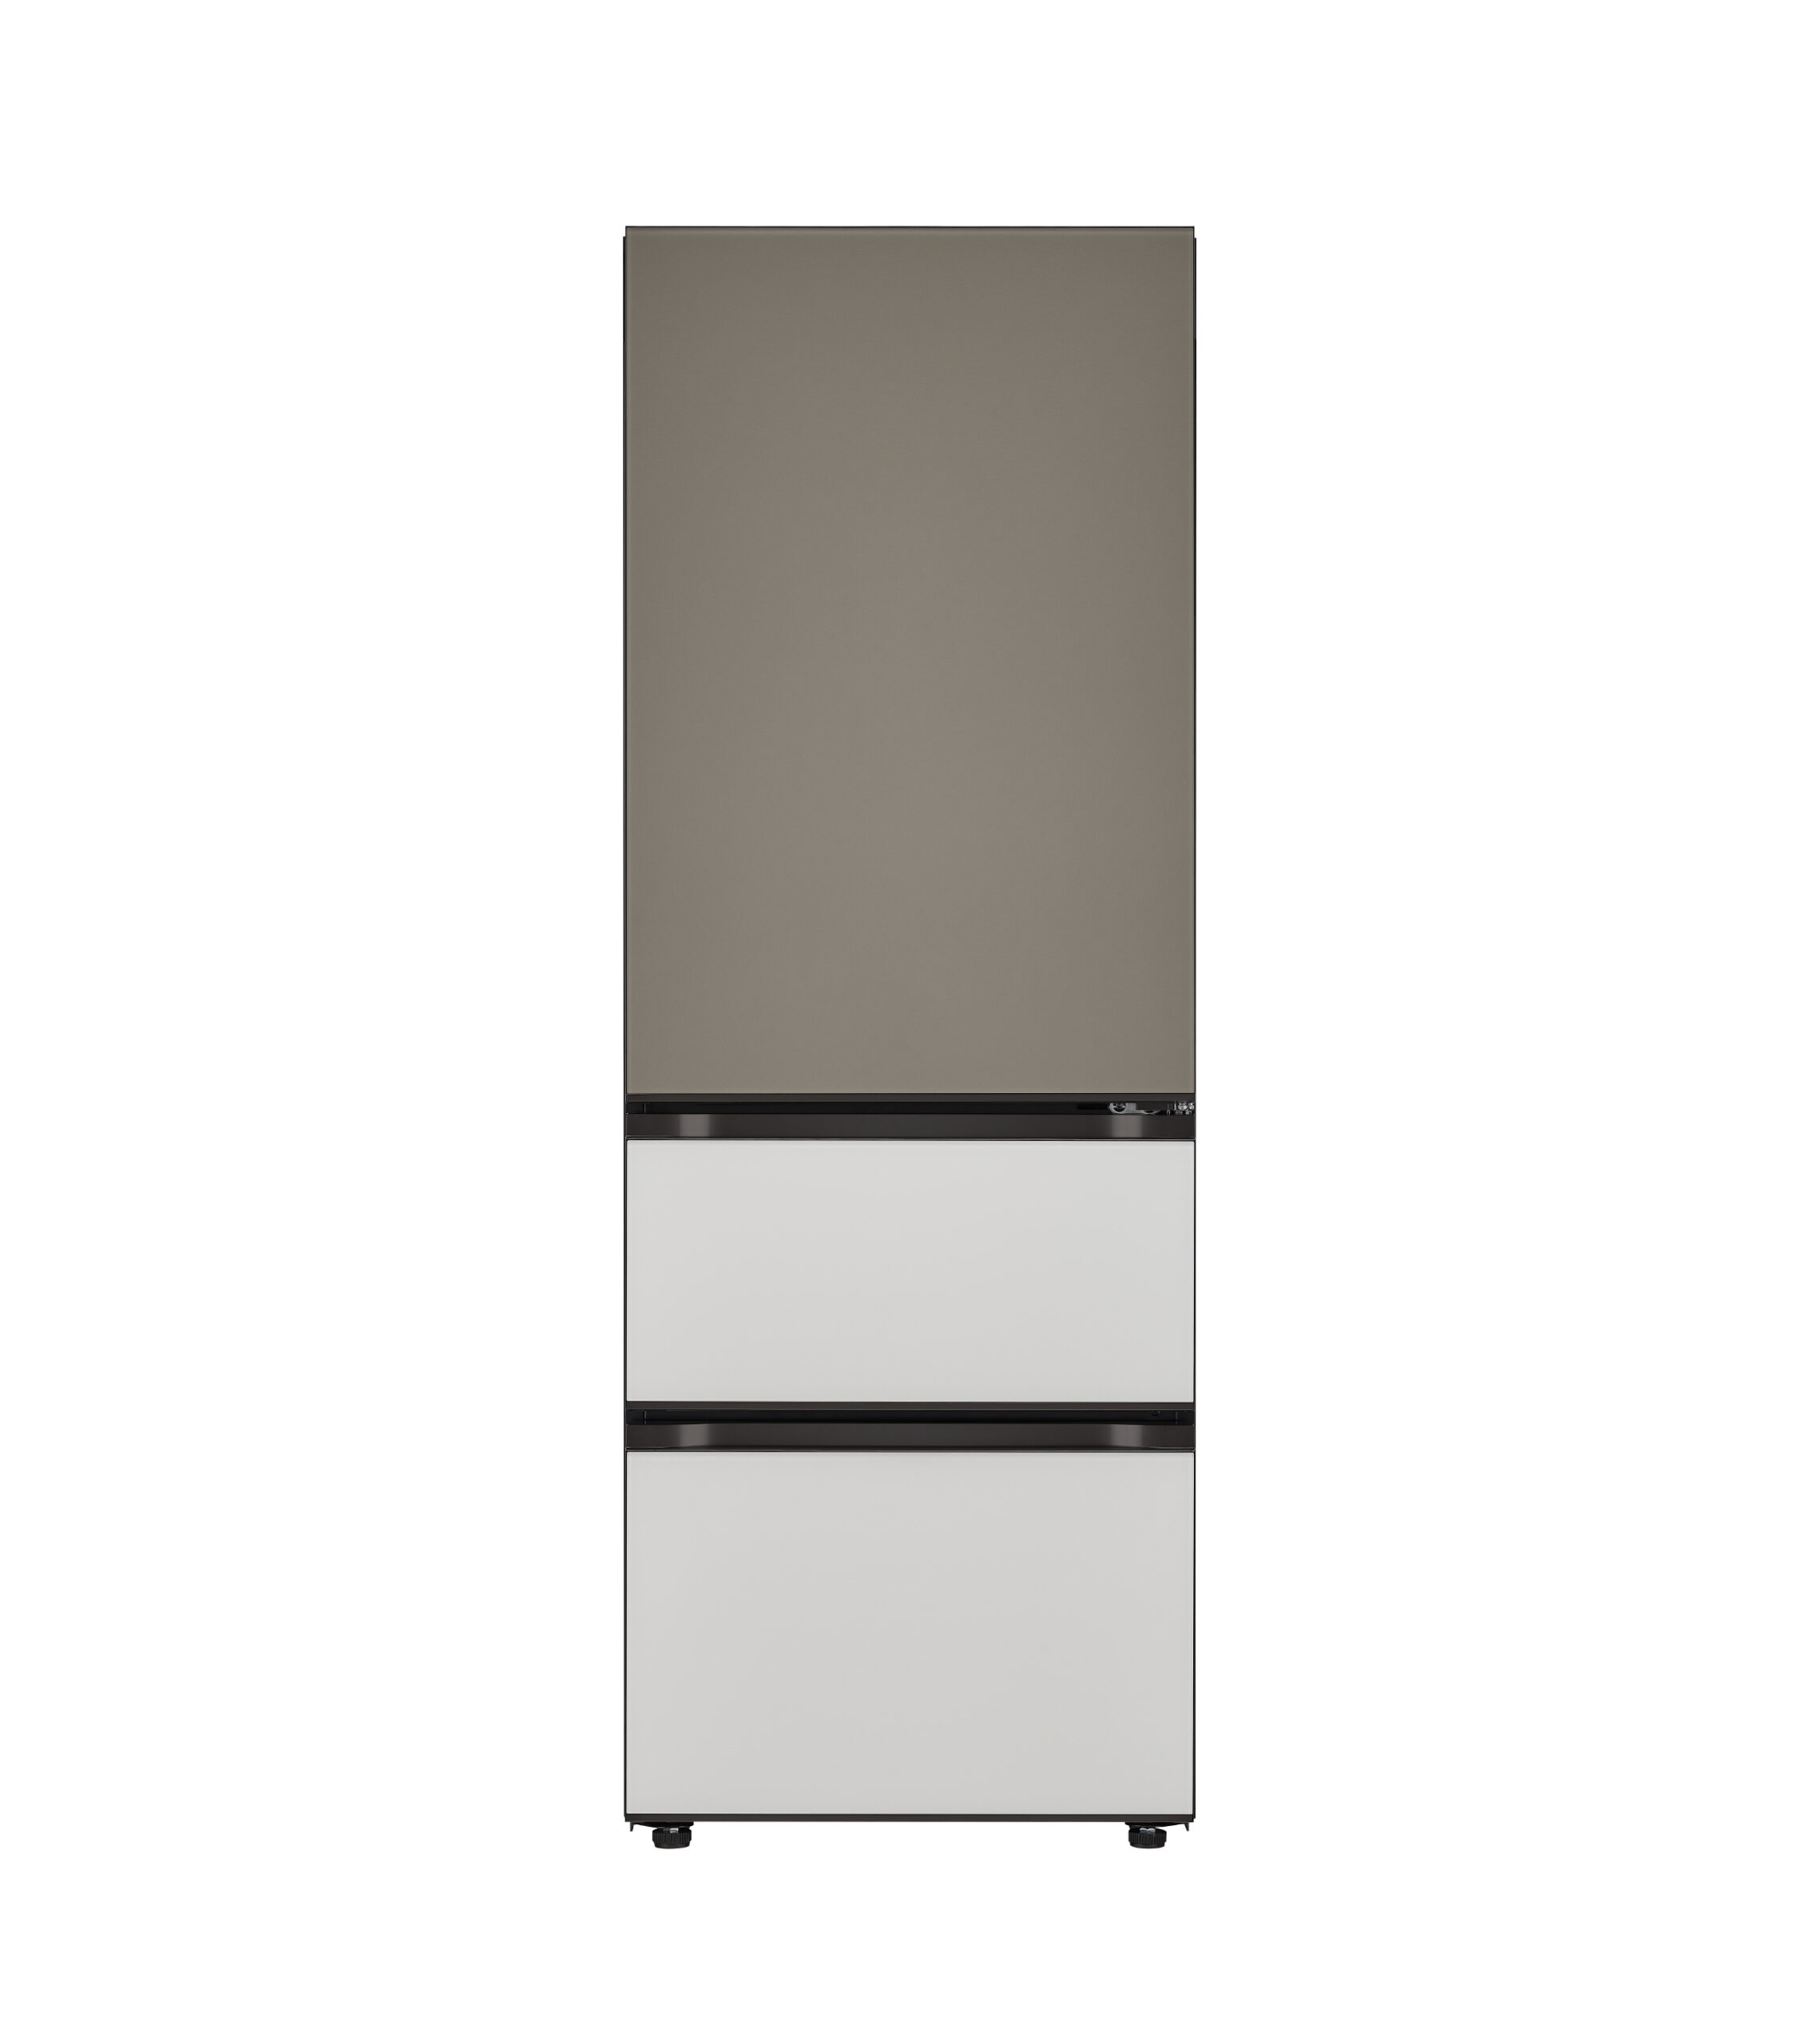 MoodUP™ refrigerator Product Mood off Lux Grey Lux White 03 scaled 1